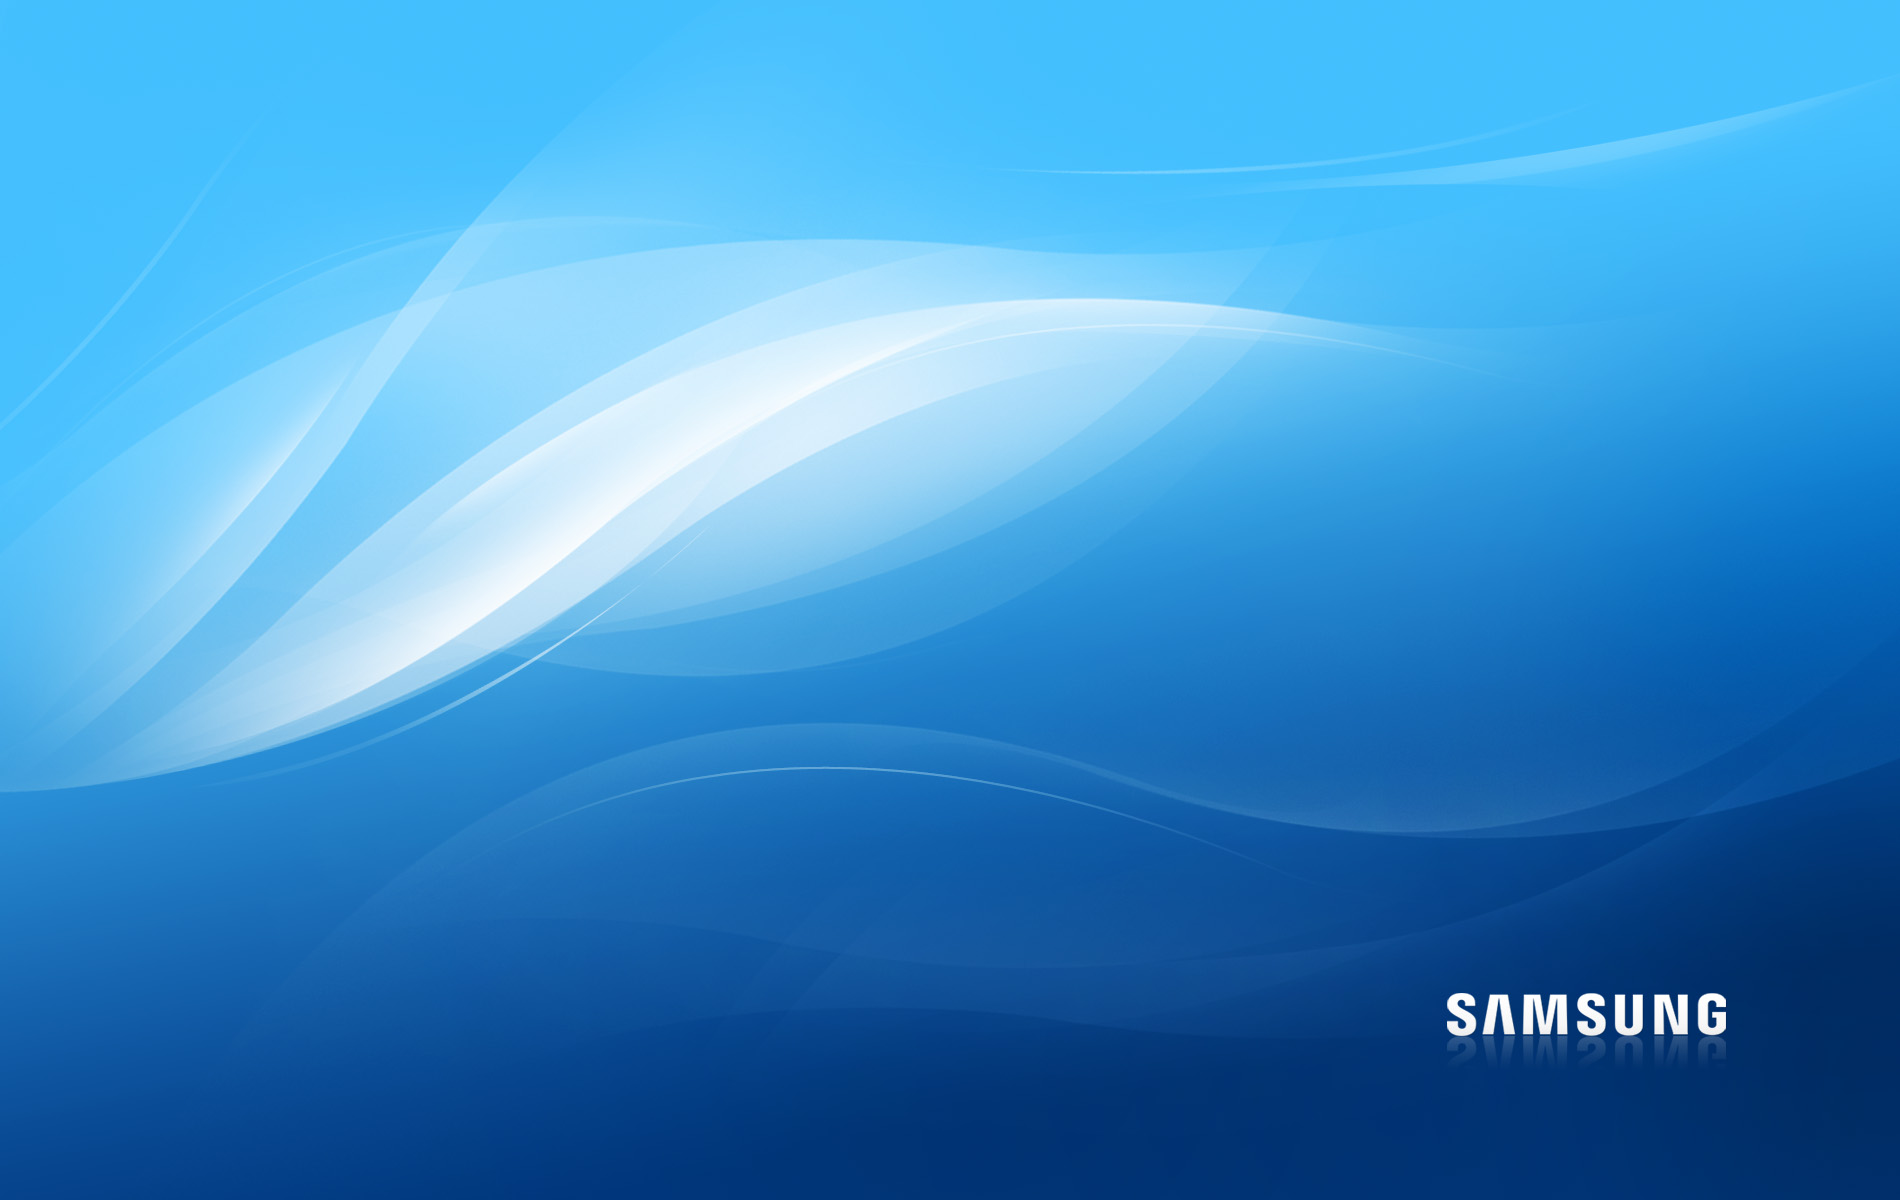 Samsung Wallpapers PC Doctor Ardee